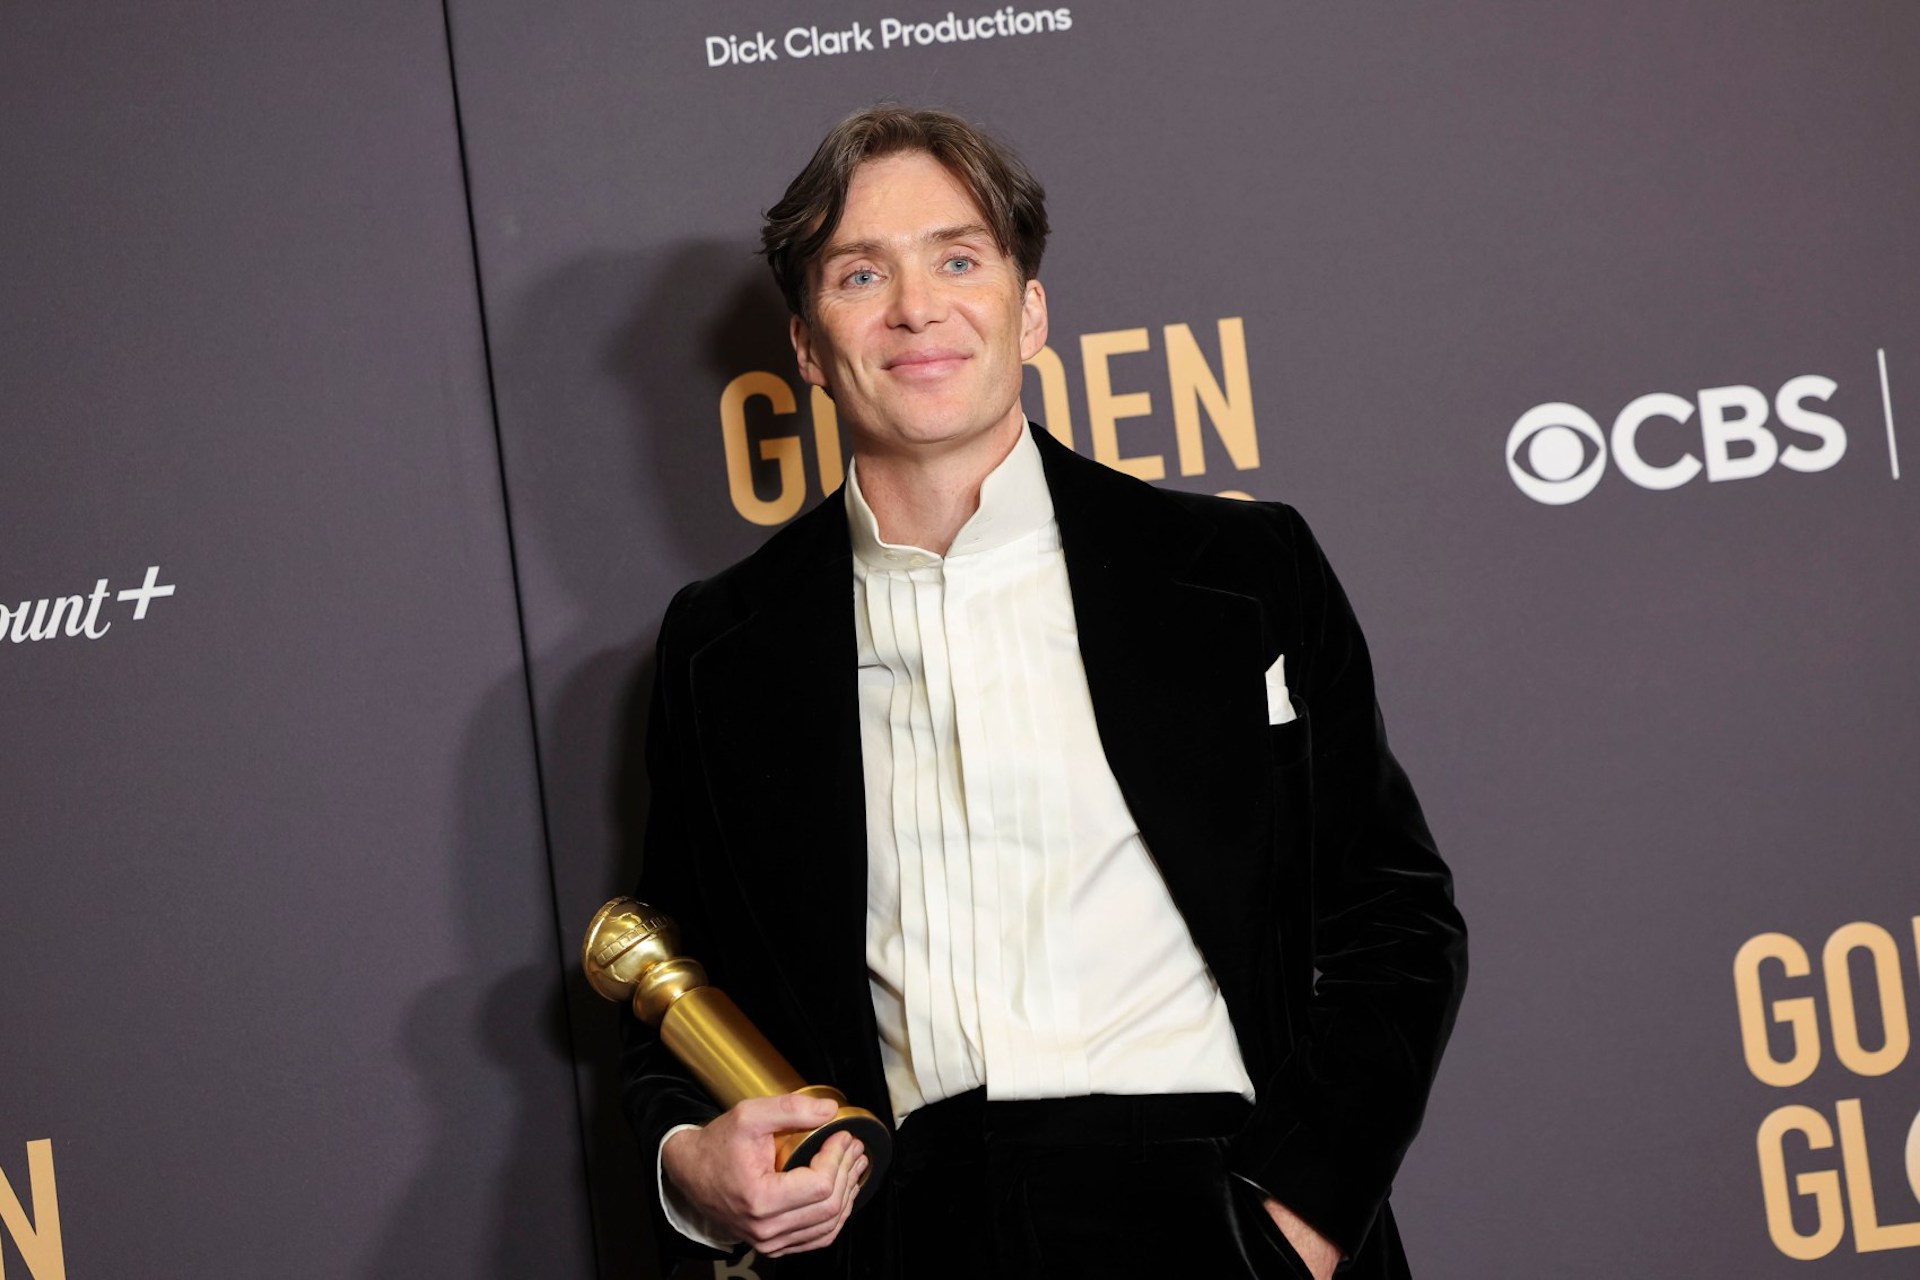 Bild: Golden Globe Awards, Cillian Murphy accepts the award for Best Performance by a Male Actor in a Motion Picture – Drama for “Oppenheimer.”. at the 81st Golden Globe Awards